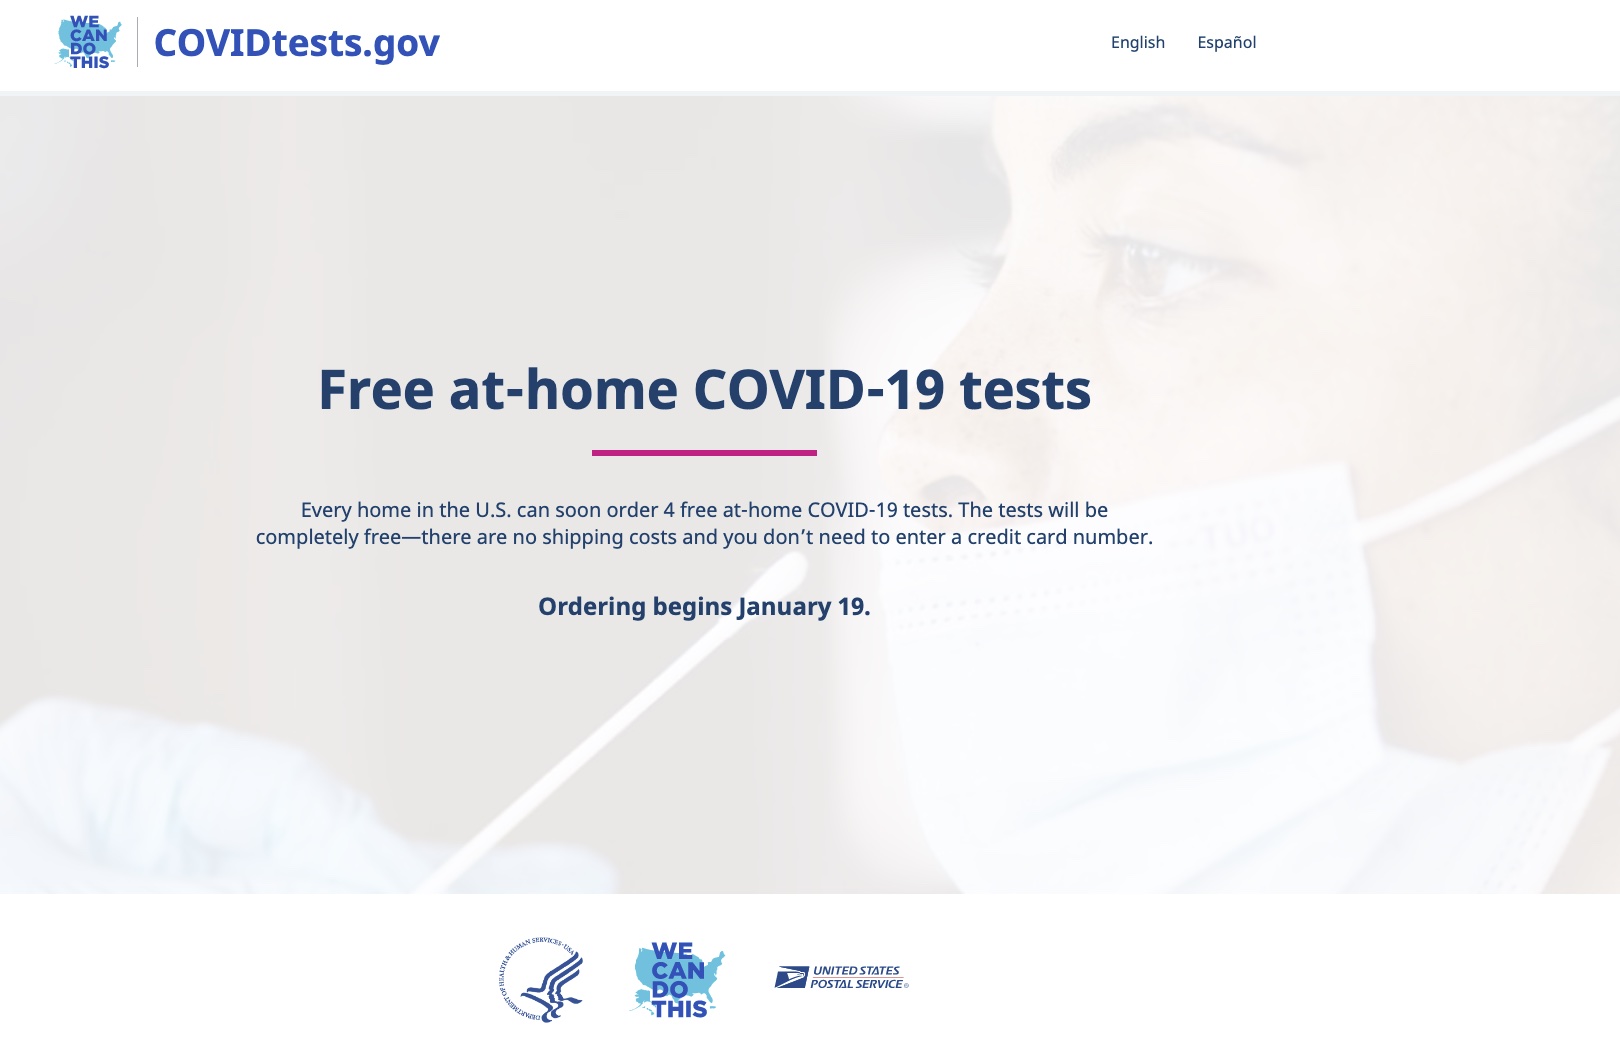 Covid tests website